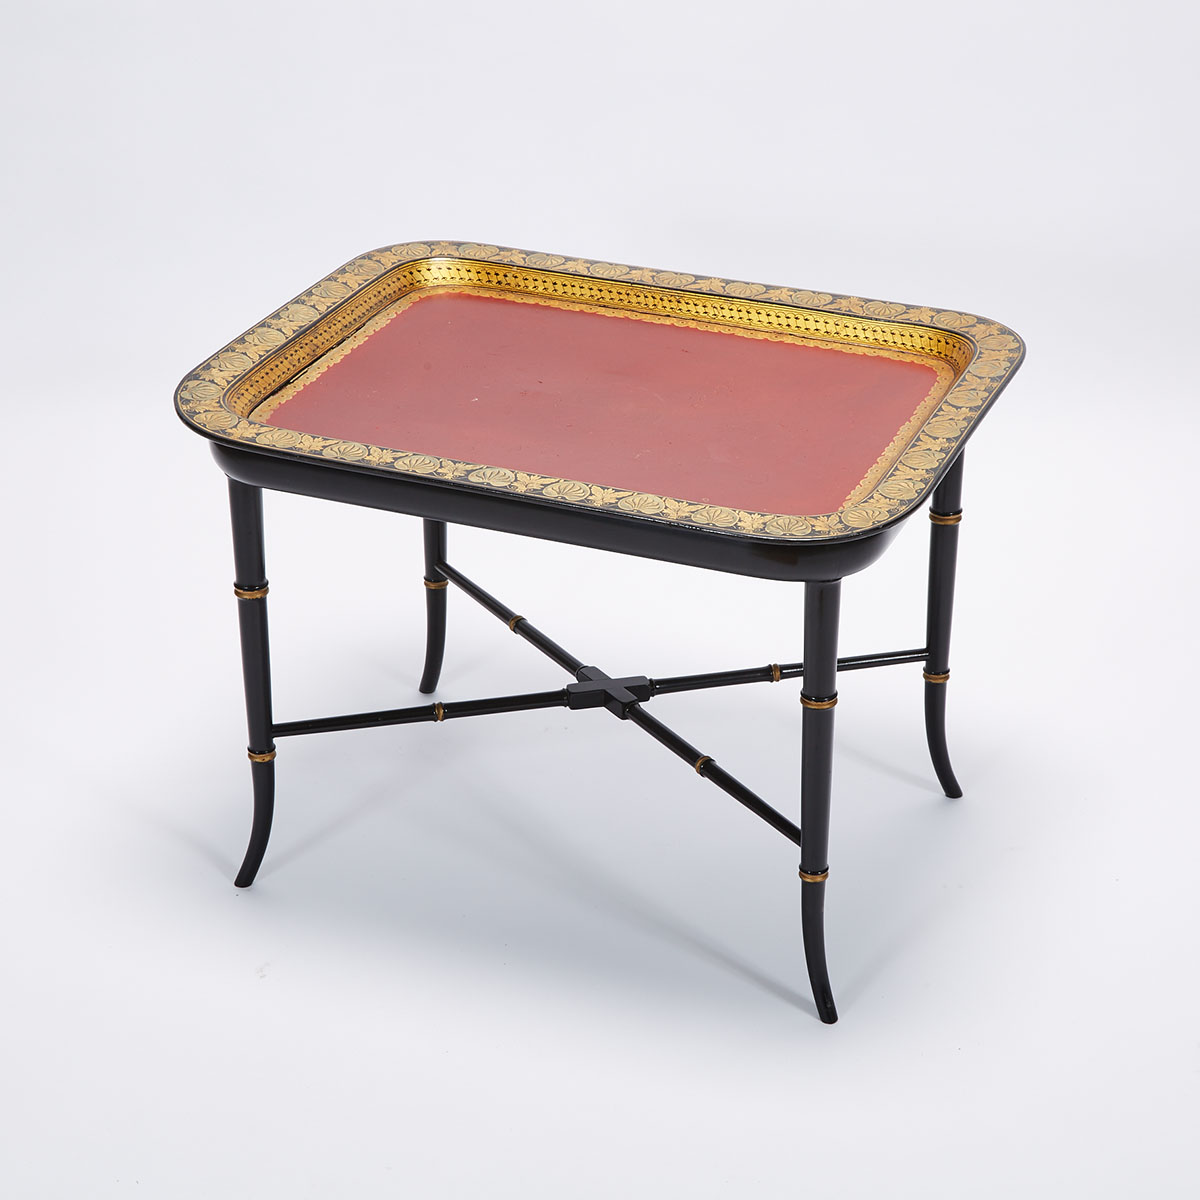 Regency Papier Maché Tea Tray, early 19th century, on Later Stand